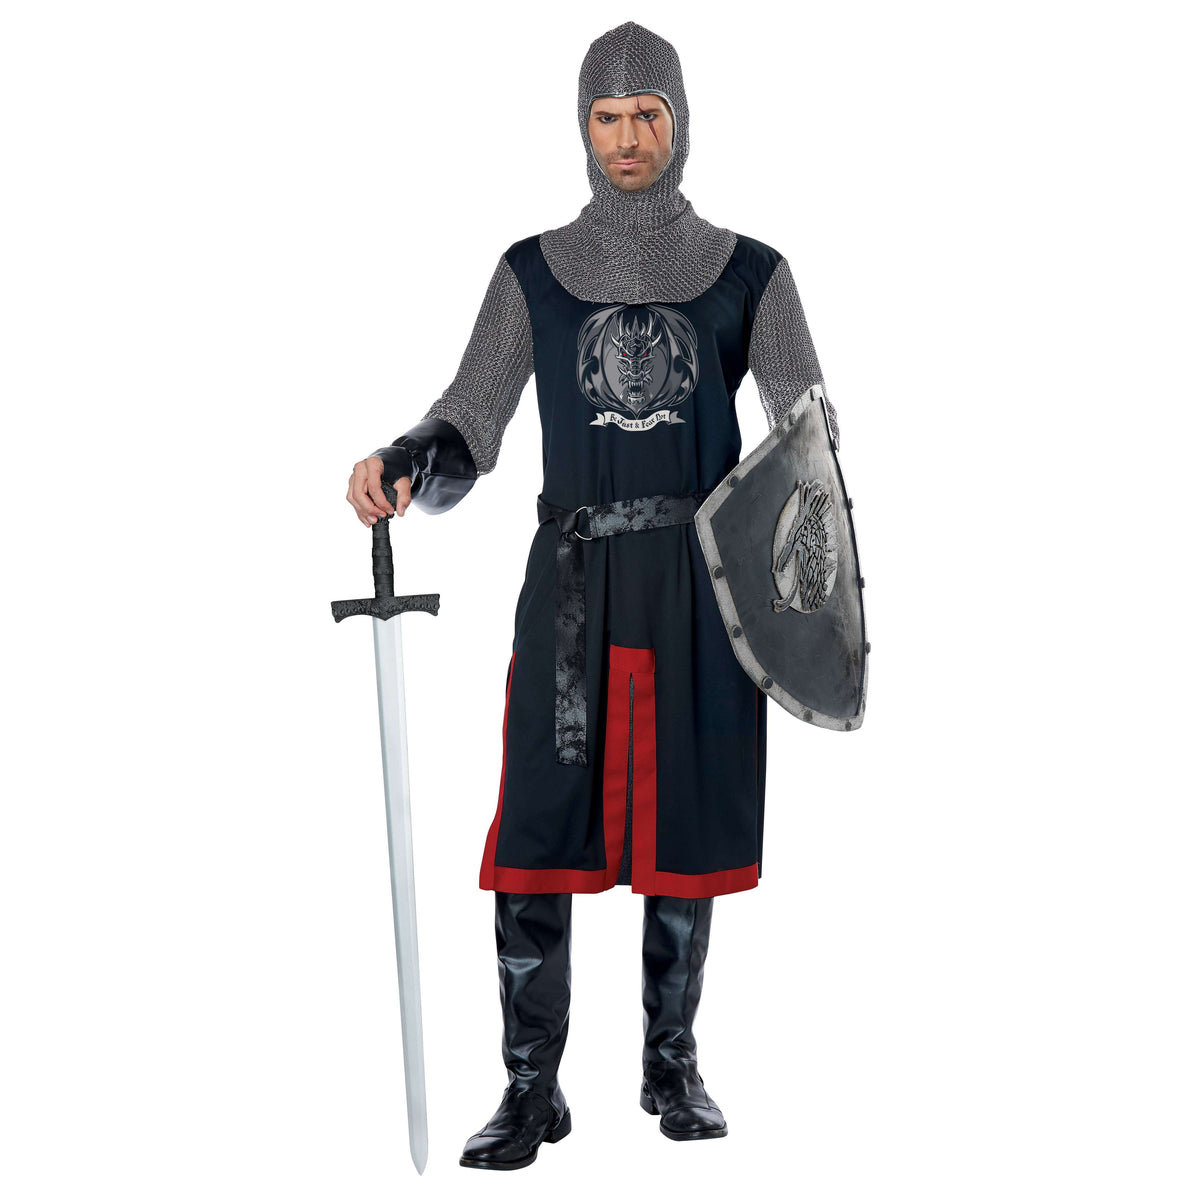 Deluxe Marvelous Medieval Knight Adult Costume